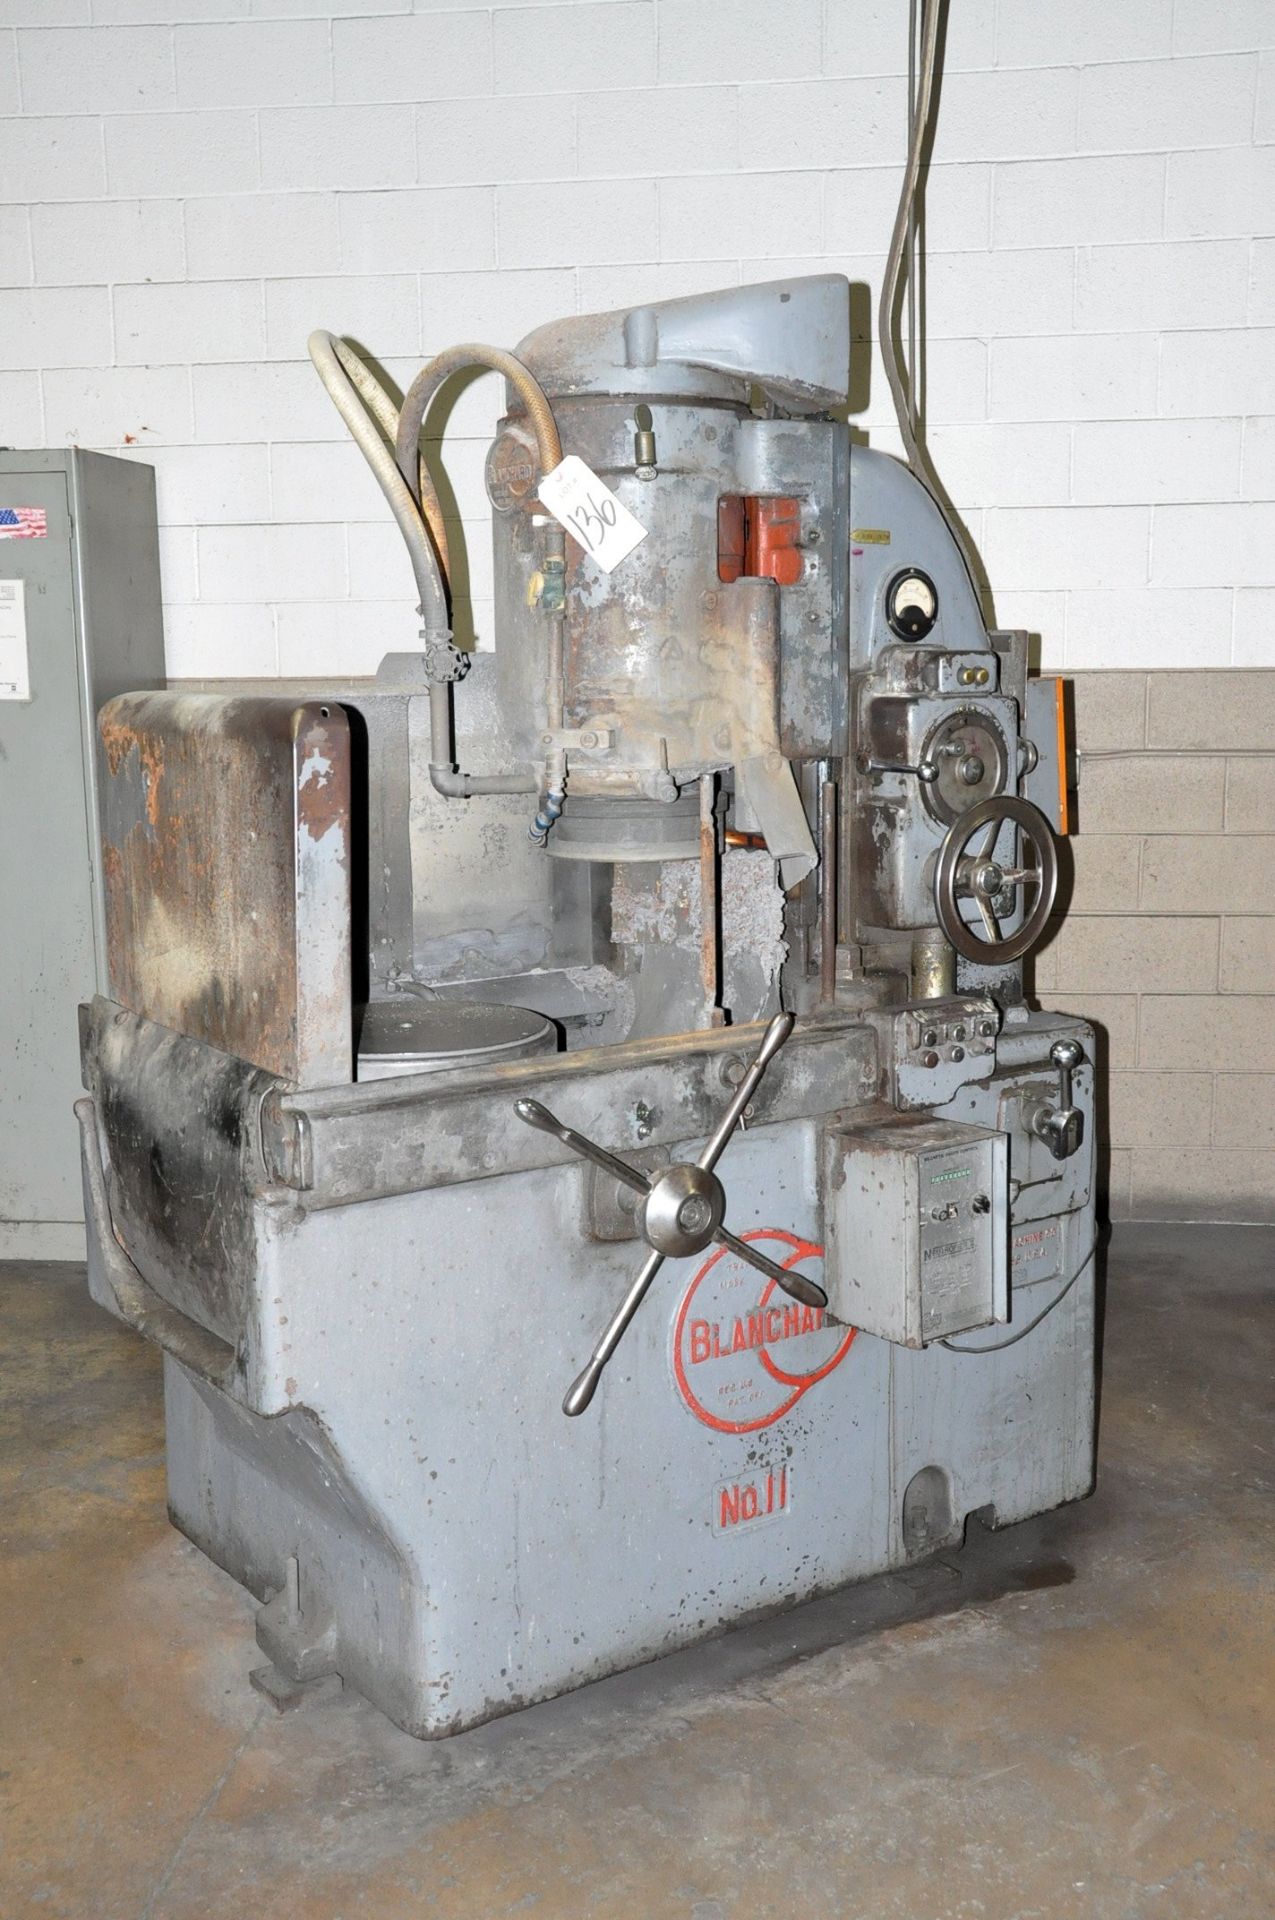 BLANCHARD No. 11, ROTARY SURFACE GRINDER, S/n 4608, One Piece Grinding Wheel, 16" Diameter Chuck,